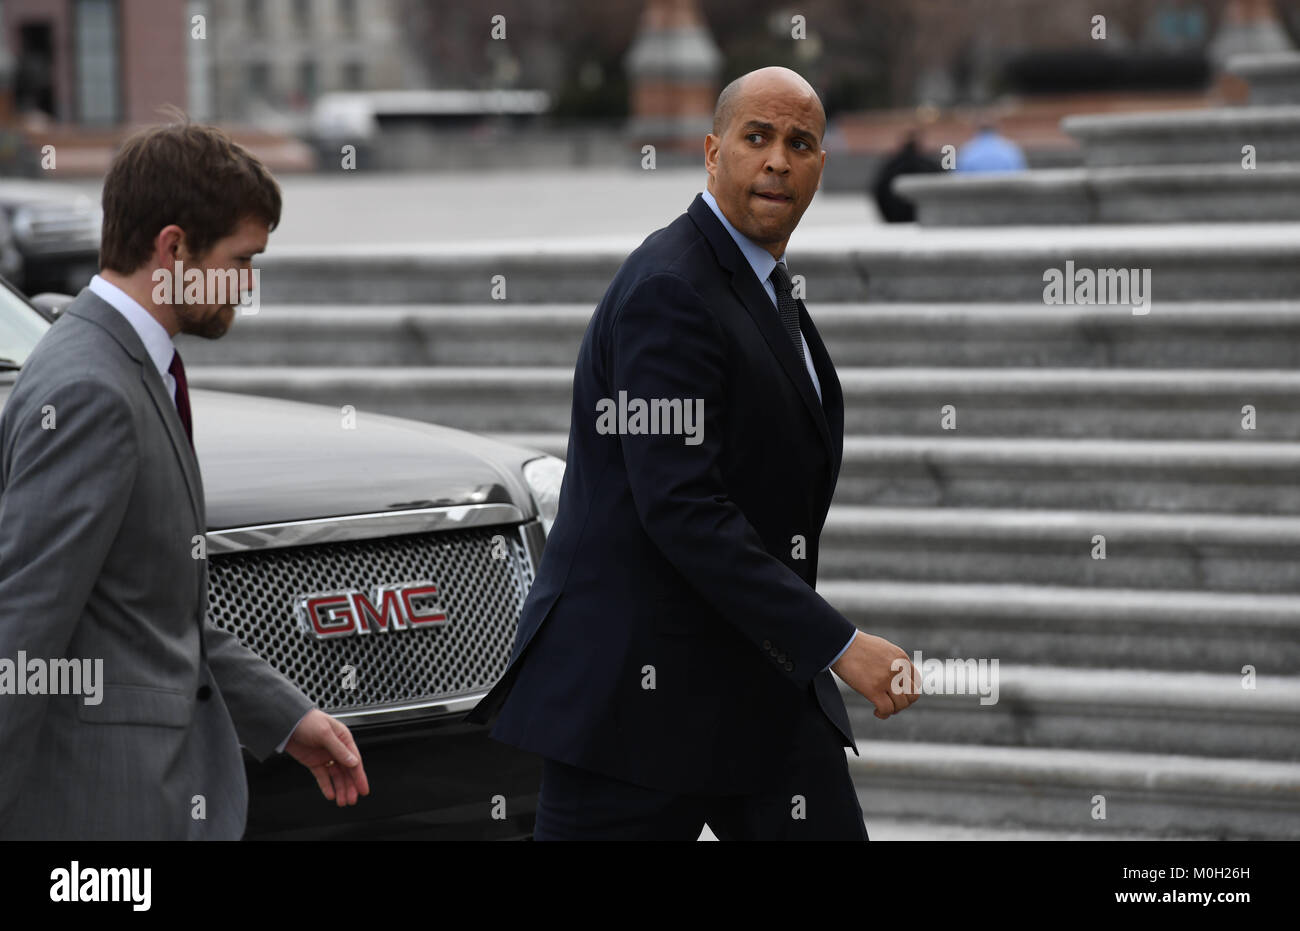 Washington, District of Columbia, USA. 22nd Jan, 2018. Senator COREY BOOKER(D-NJ) walks into the Senate chamber Monday for a vote that would end the three-day old U.S. government shutdown after Senate Democrats joined Republicans in supporting a deal on immigration and spending. Credit: Miguel Juarez Lugo/ZUMA Wire/Alamy Live News Stock Photo